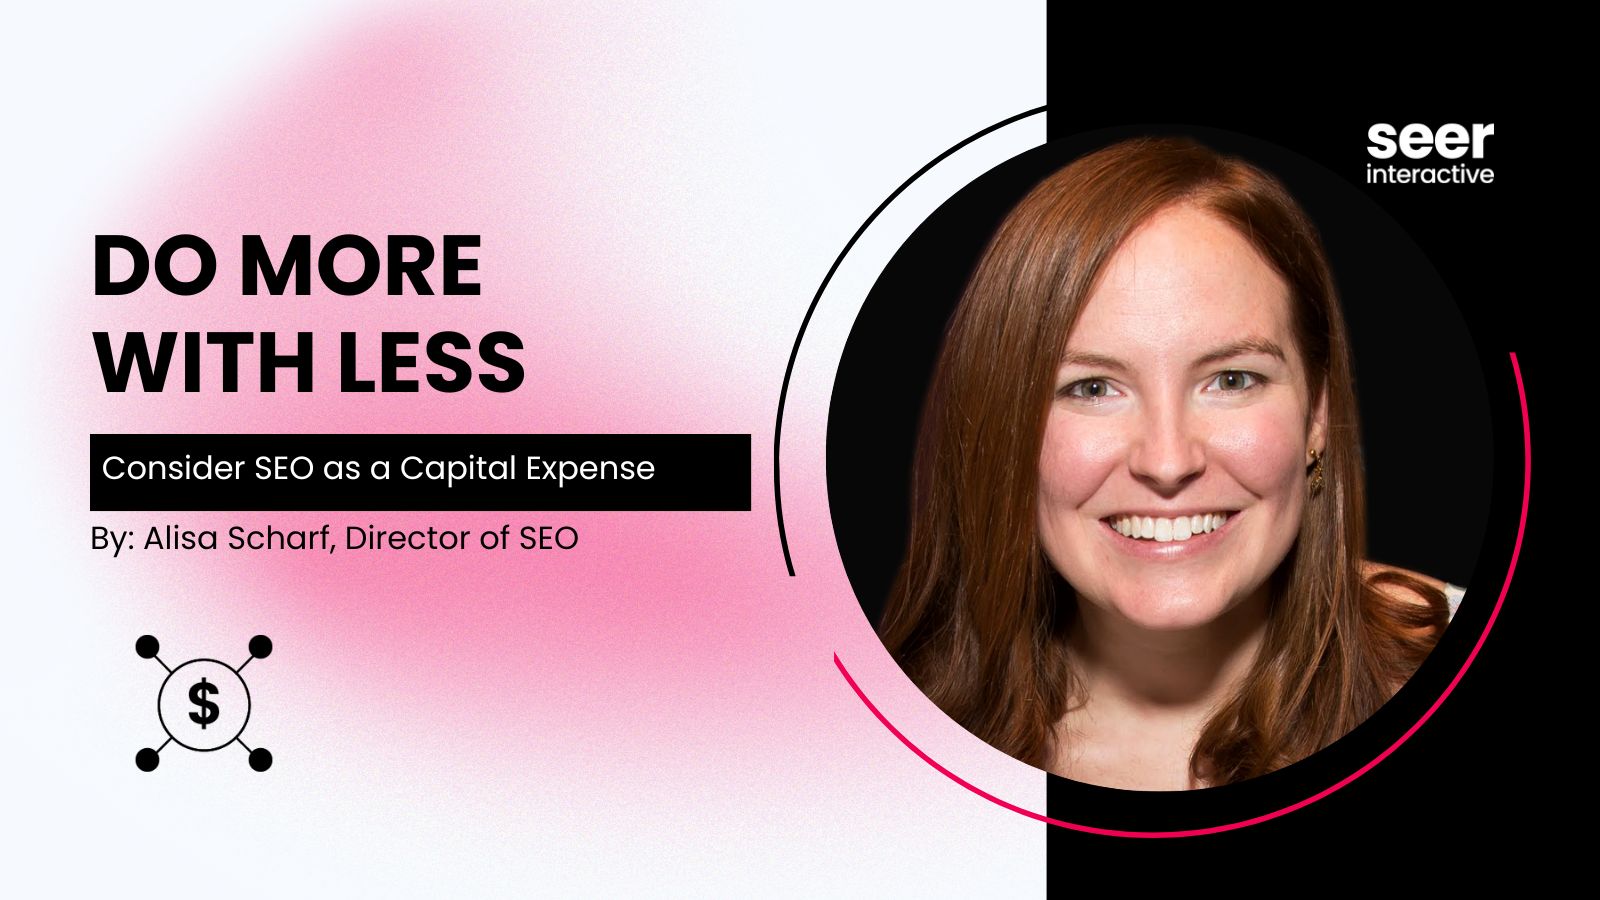 Do More With Less: Should SEO be a Capital or Operational Expense?